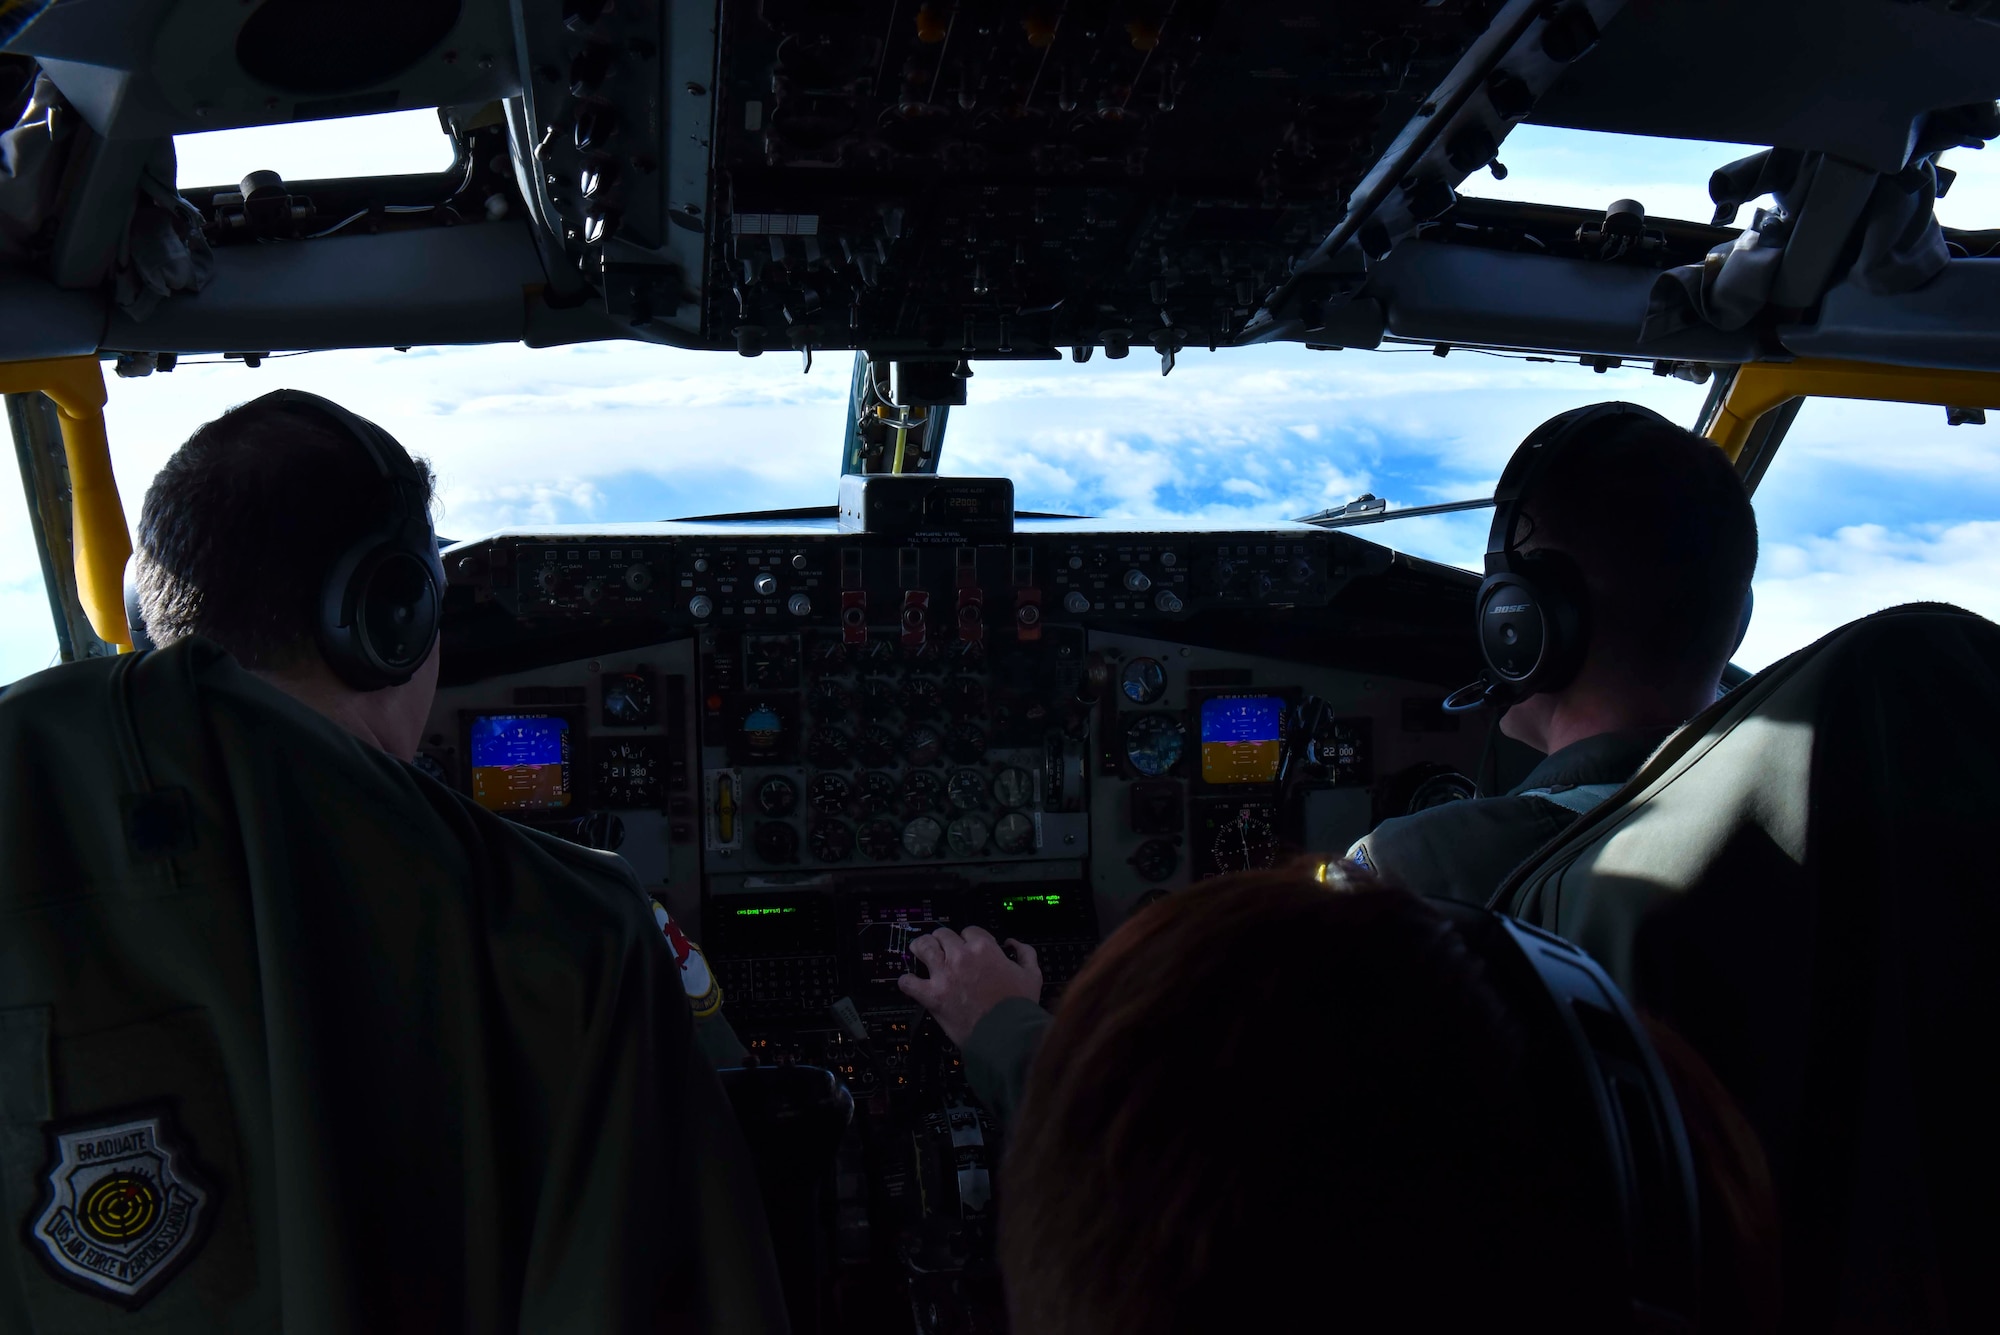 U.S. Air Force Lt. Col. Philippe “Dizzy” Melby, 509th Weapons Squadron commander, and Col. Gene Jacobus, 92nd Air Refueling Wing vice commander, participate in training maneuvers while flying a KC-135 Stratotanker over the Inland Northwest Jan. 22, 2020. Pilots are committed to staying ready for possible deployments by practicing how to react to enemy fire. (U.S. Air Force photo by Airman 1st Class Kiaundra Miller)